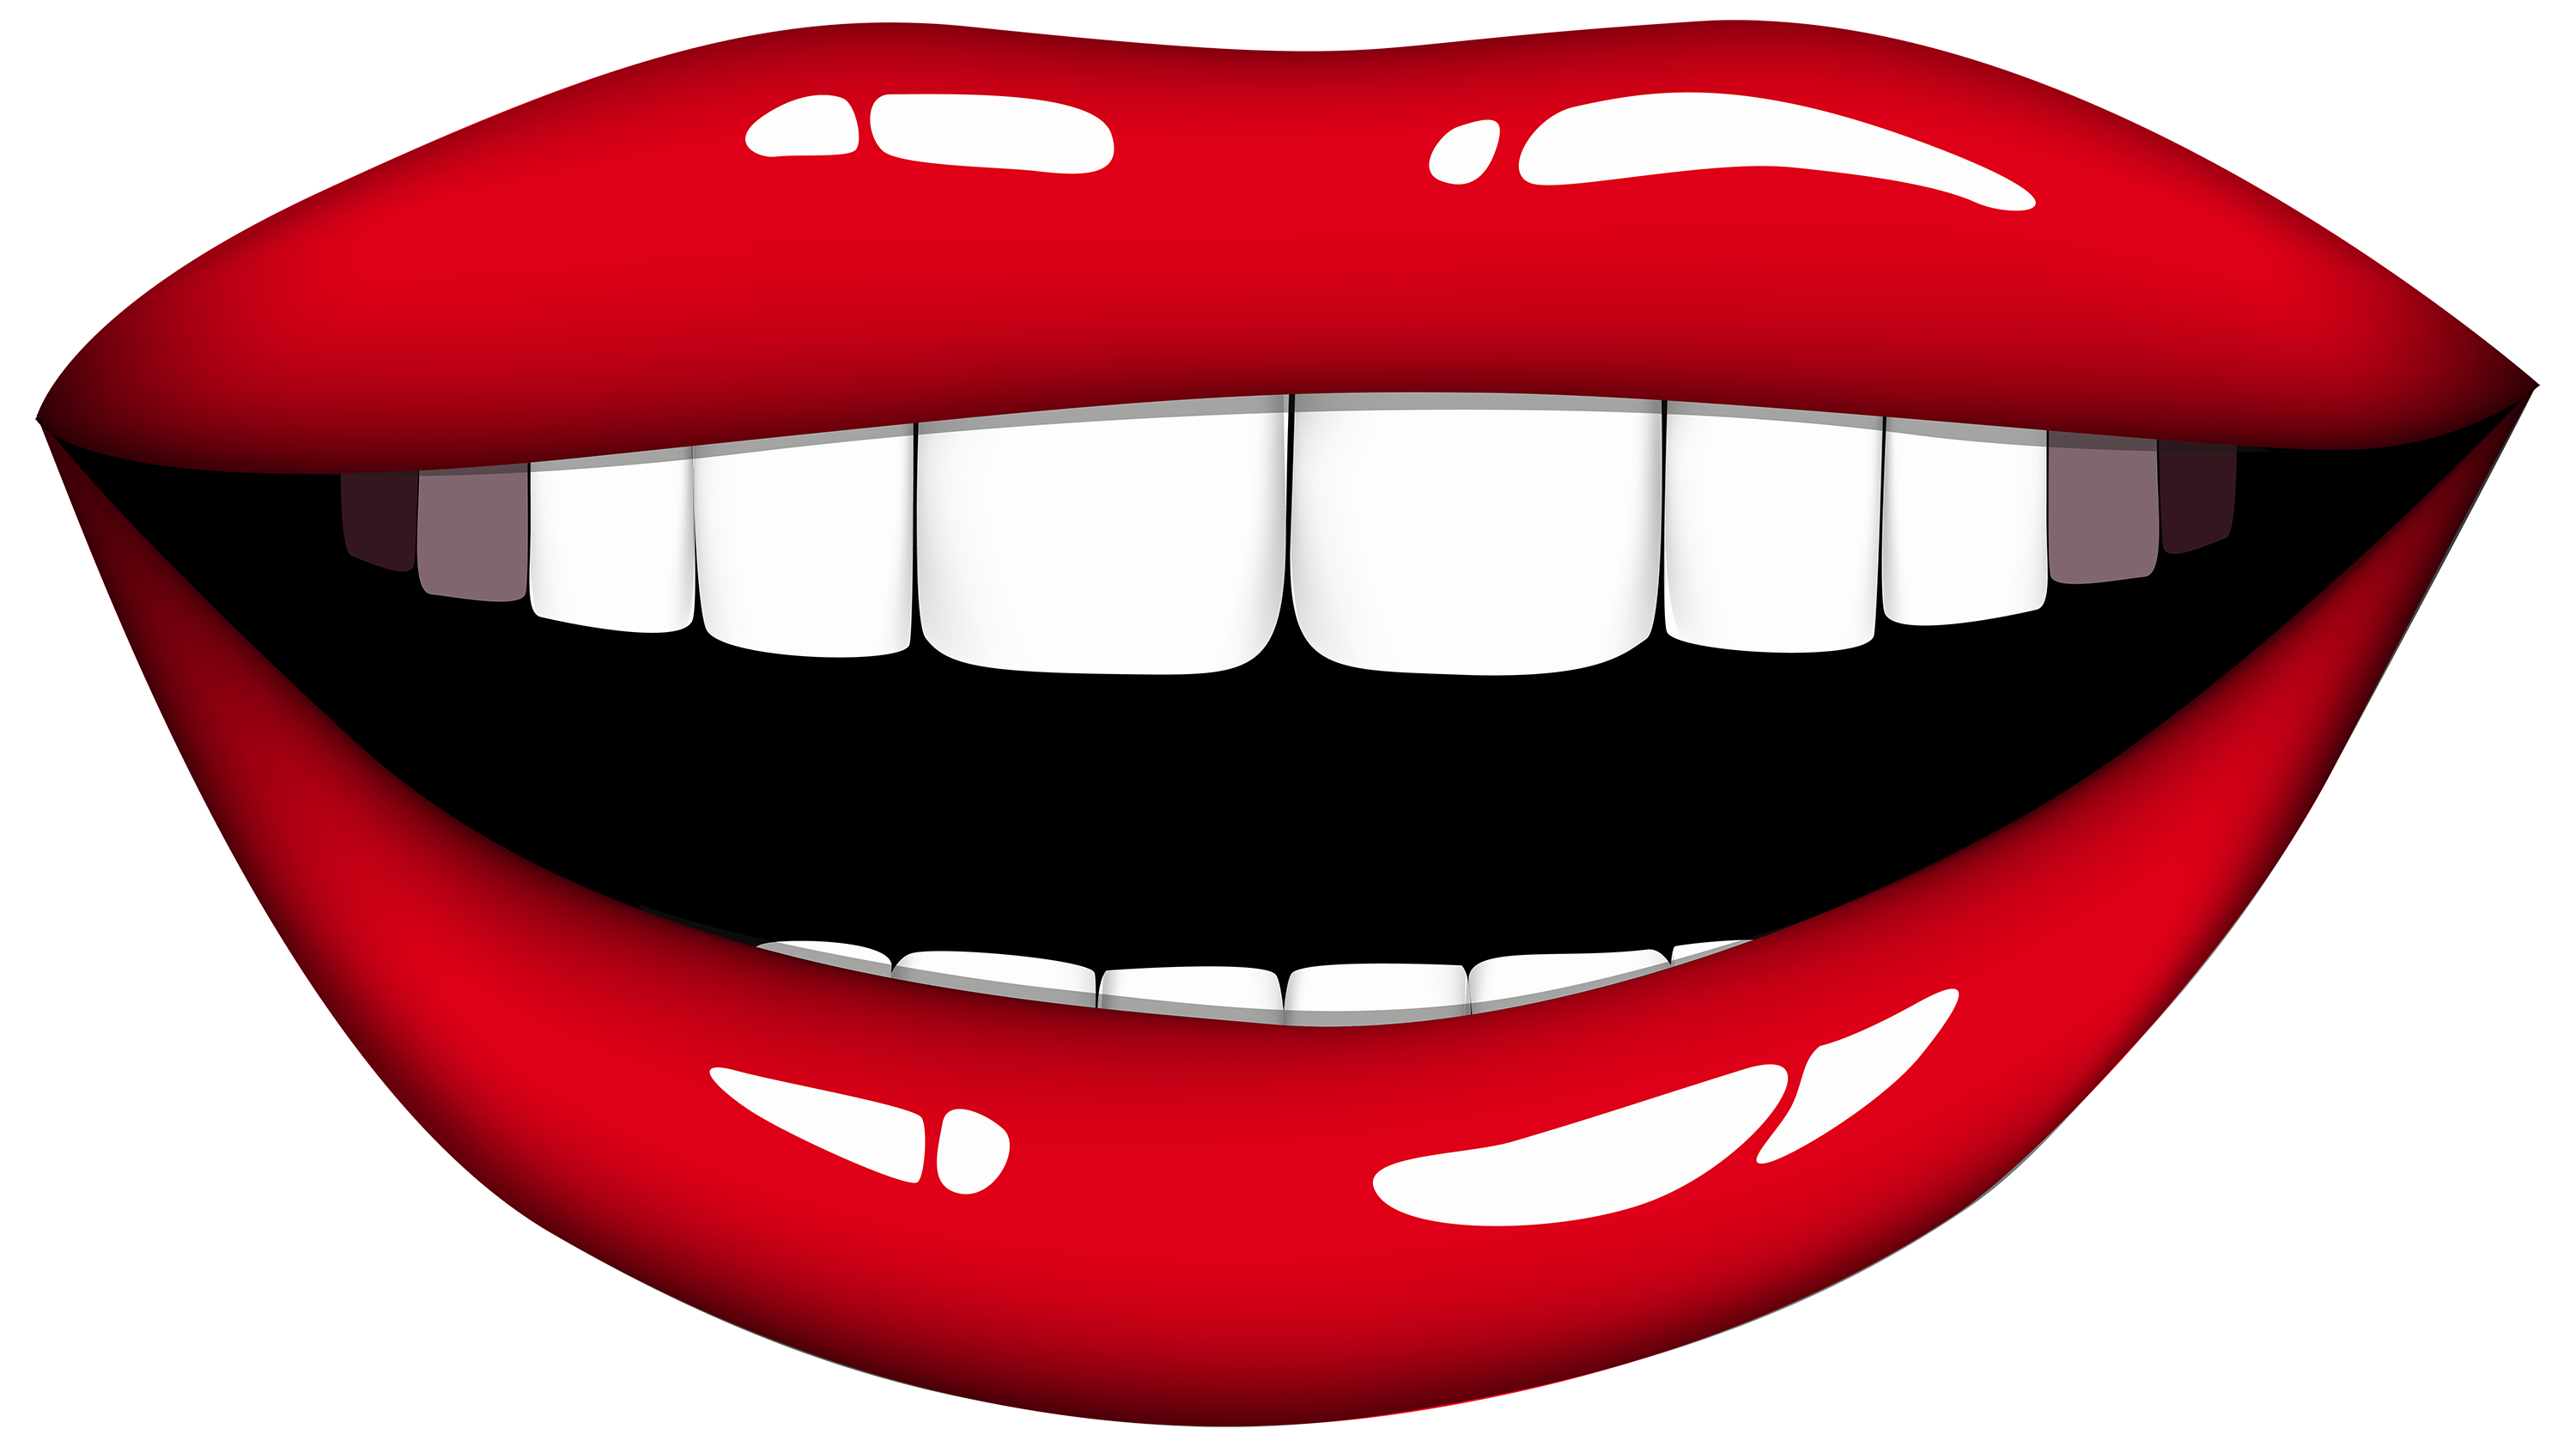 Mouth Smile Clip Art Smiling Mouth Cliparts Png Download 30001685